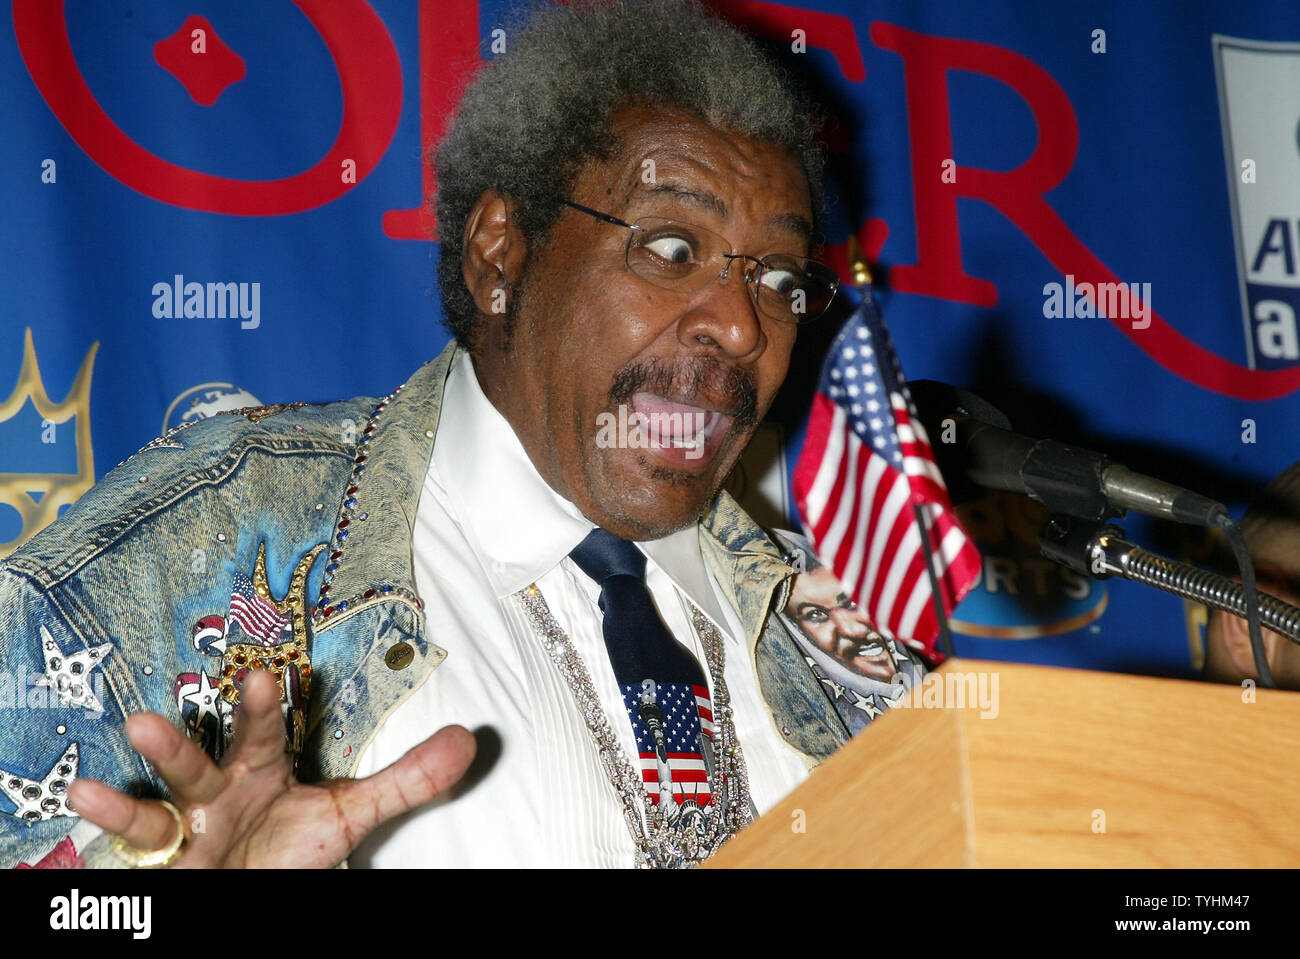 Boxing Promoter Don King announces the upcoming boxing match between Monte 'Two Gunz' Barrett and Nikolai 'Russian Giant' Valuev (to be held in Chicago on October 7, 2006) at a press conference at the Firebird Russian Restaurant in New York on August 30, 2006.  (UPI Photo/Laura Cavanaugh) Stock Photo